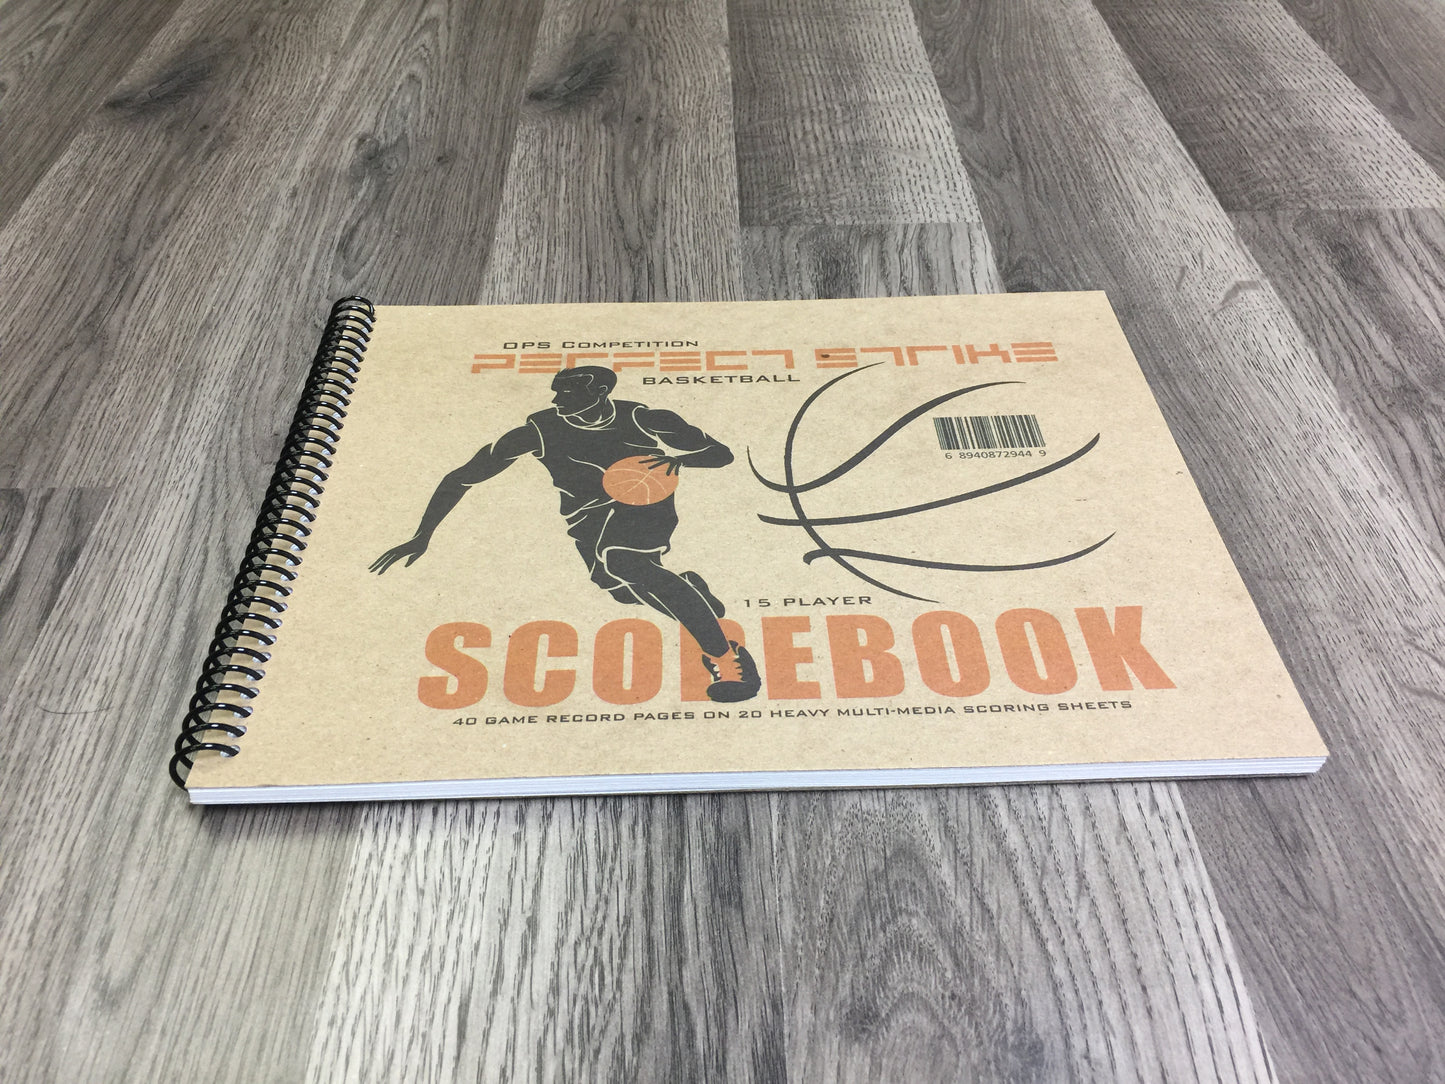 Perfect Strike Basketball Scorebook with Rules and Scoring Instructions : Side-by-Side. Heavy Duty. Youth and Adult Basketball. LS-15P